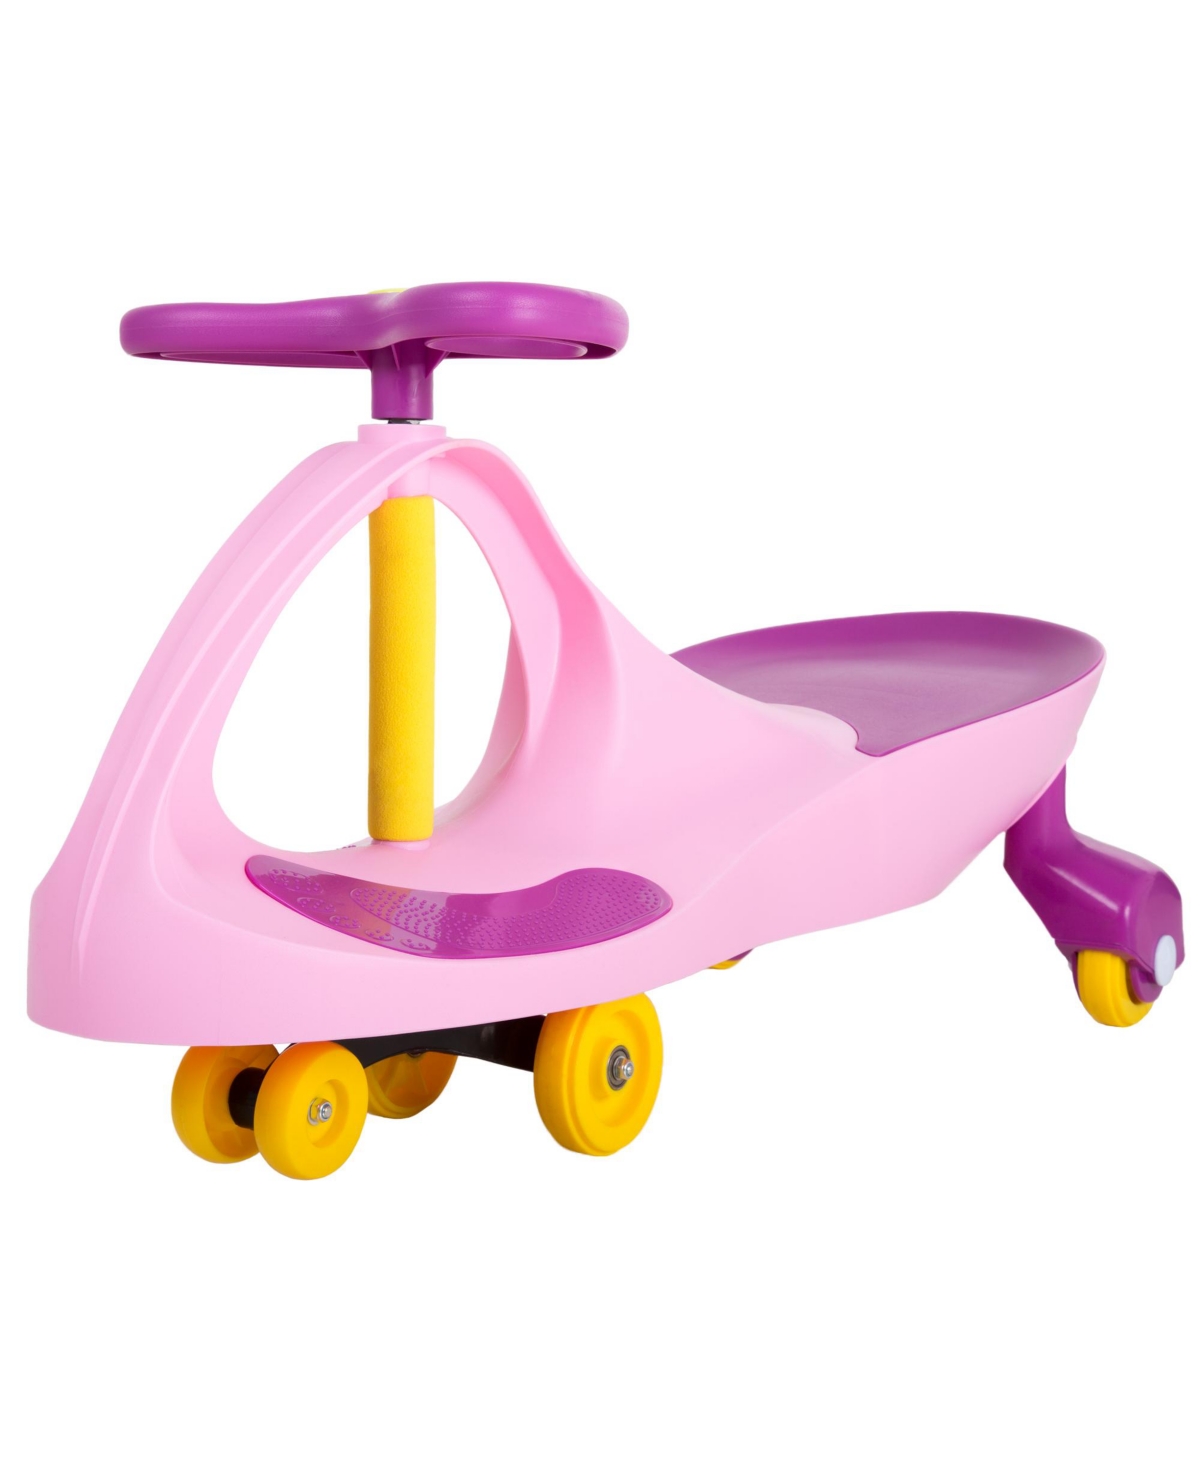 Lil' Rider Ride On Wiggle Car In Pink